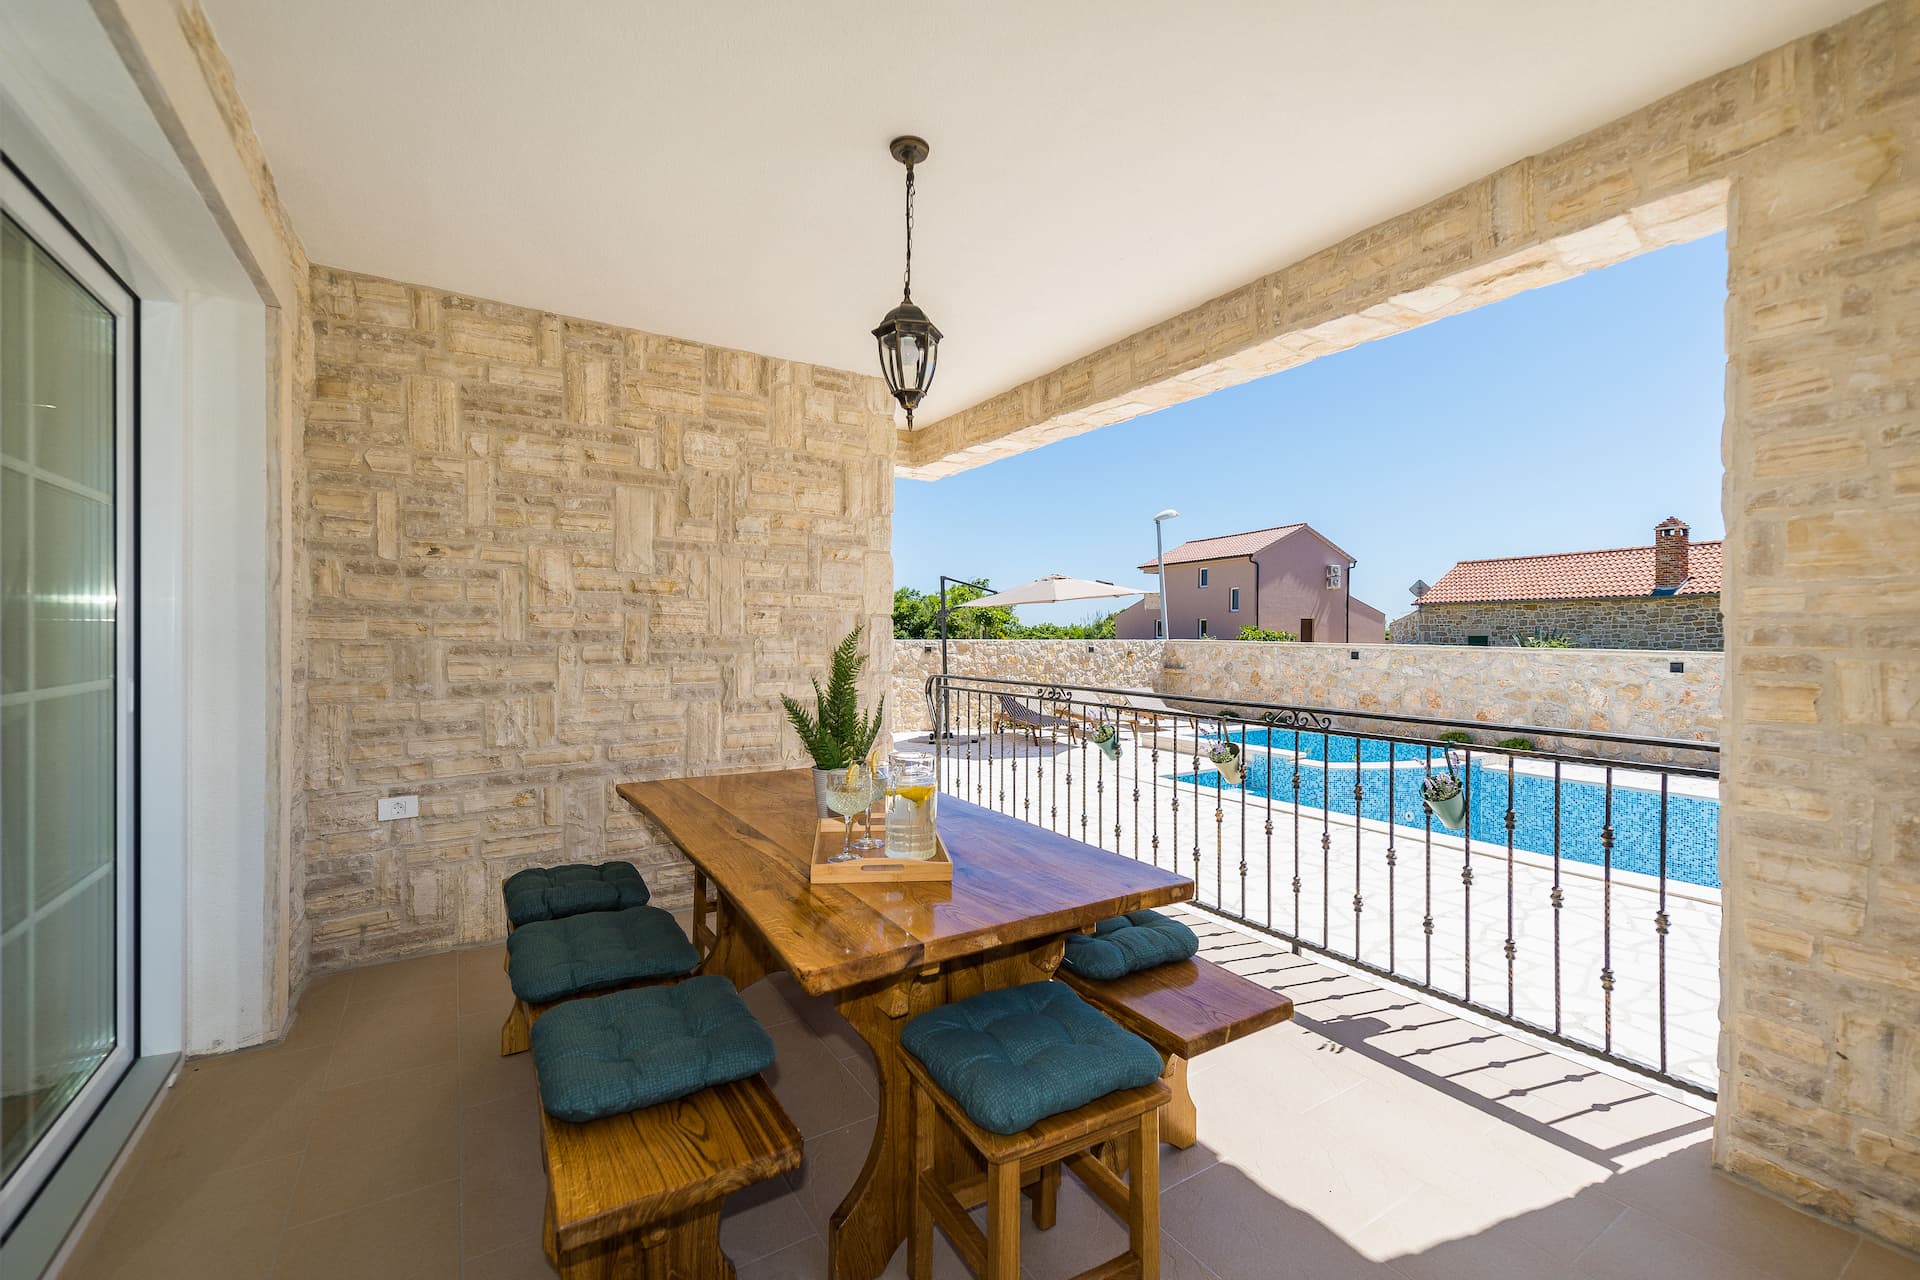 New stone villa with pool and Jacuzzi, close to the beach